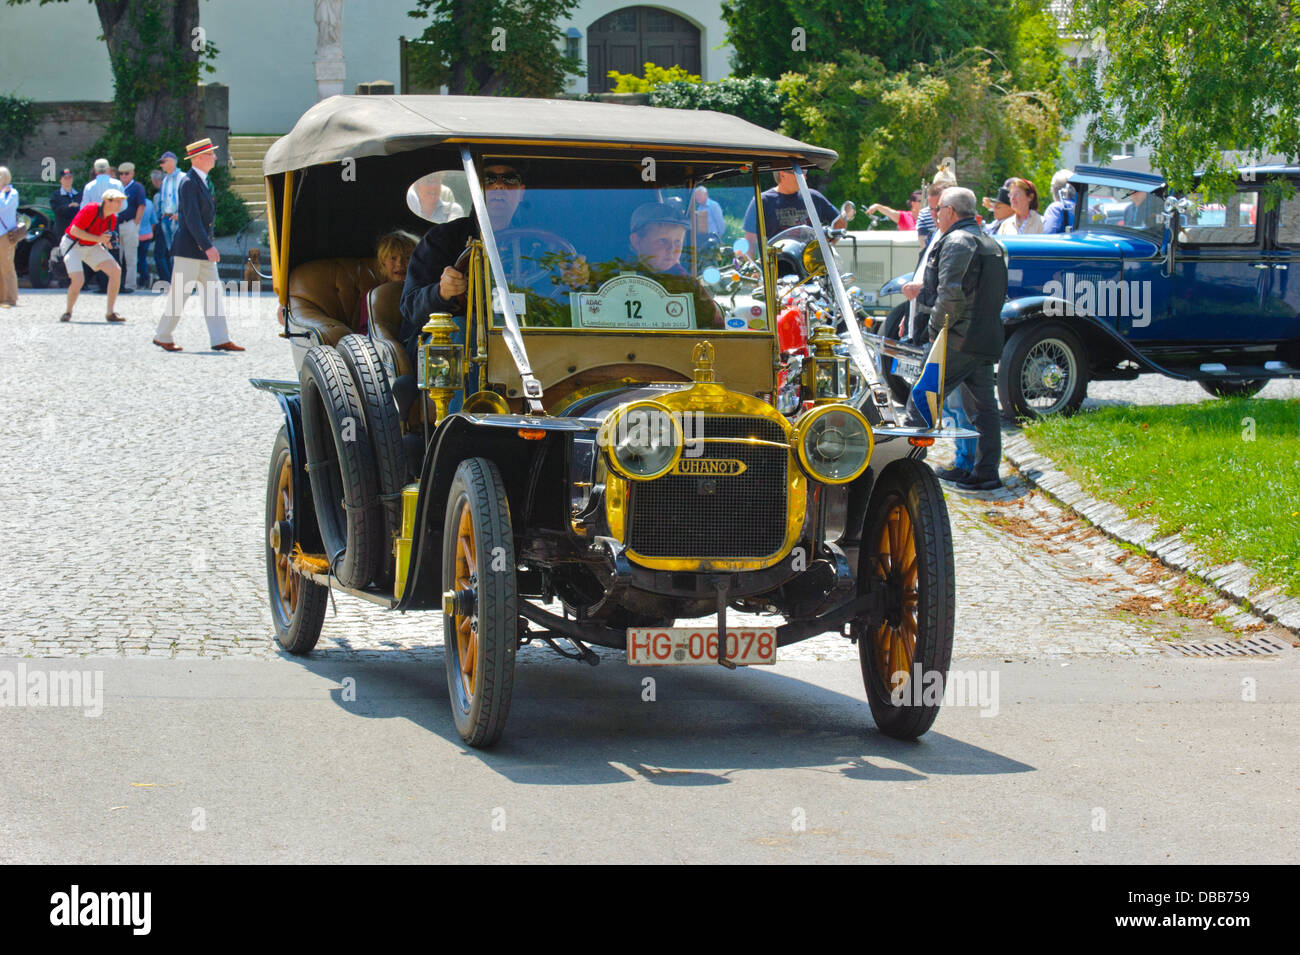 Oldtimer rallye for at least 80 years old antique cars with Duhanot CG Bolide, built at year 1907 Stock Photo